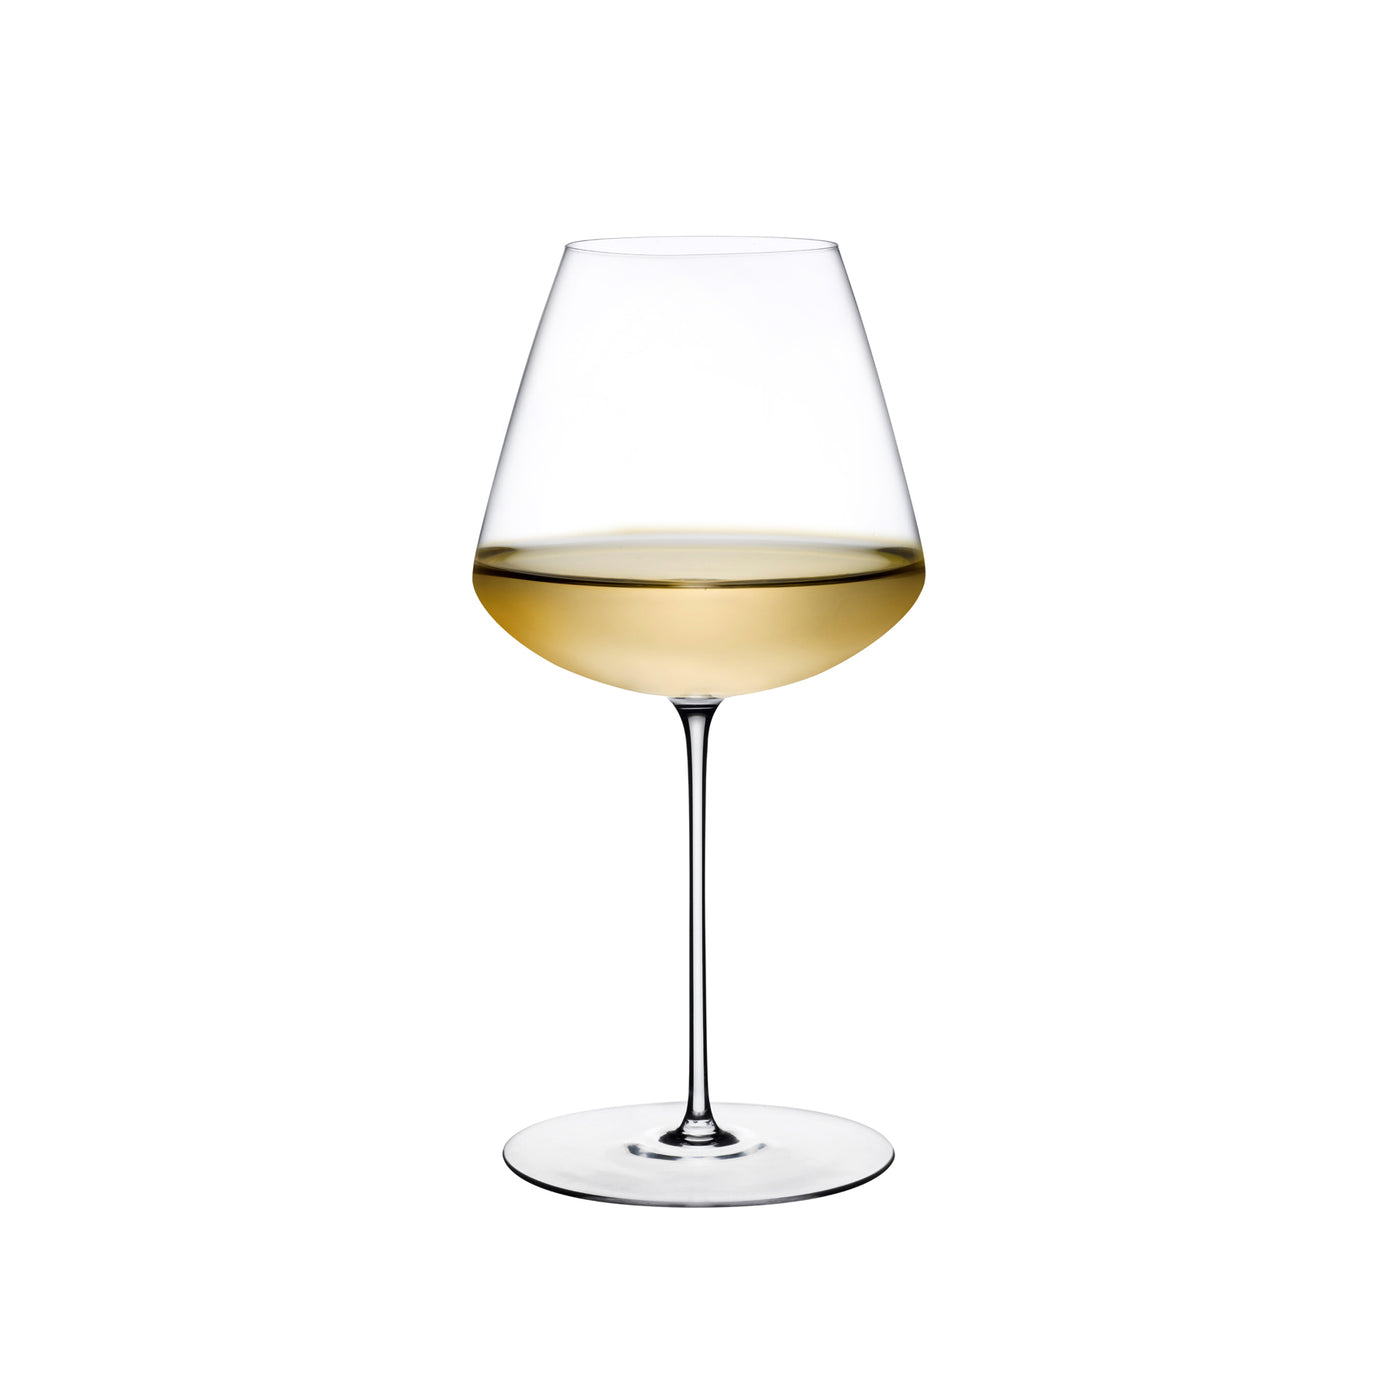 Ion Shatter Resistant Wine Glass (S/2)